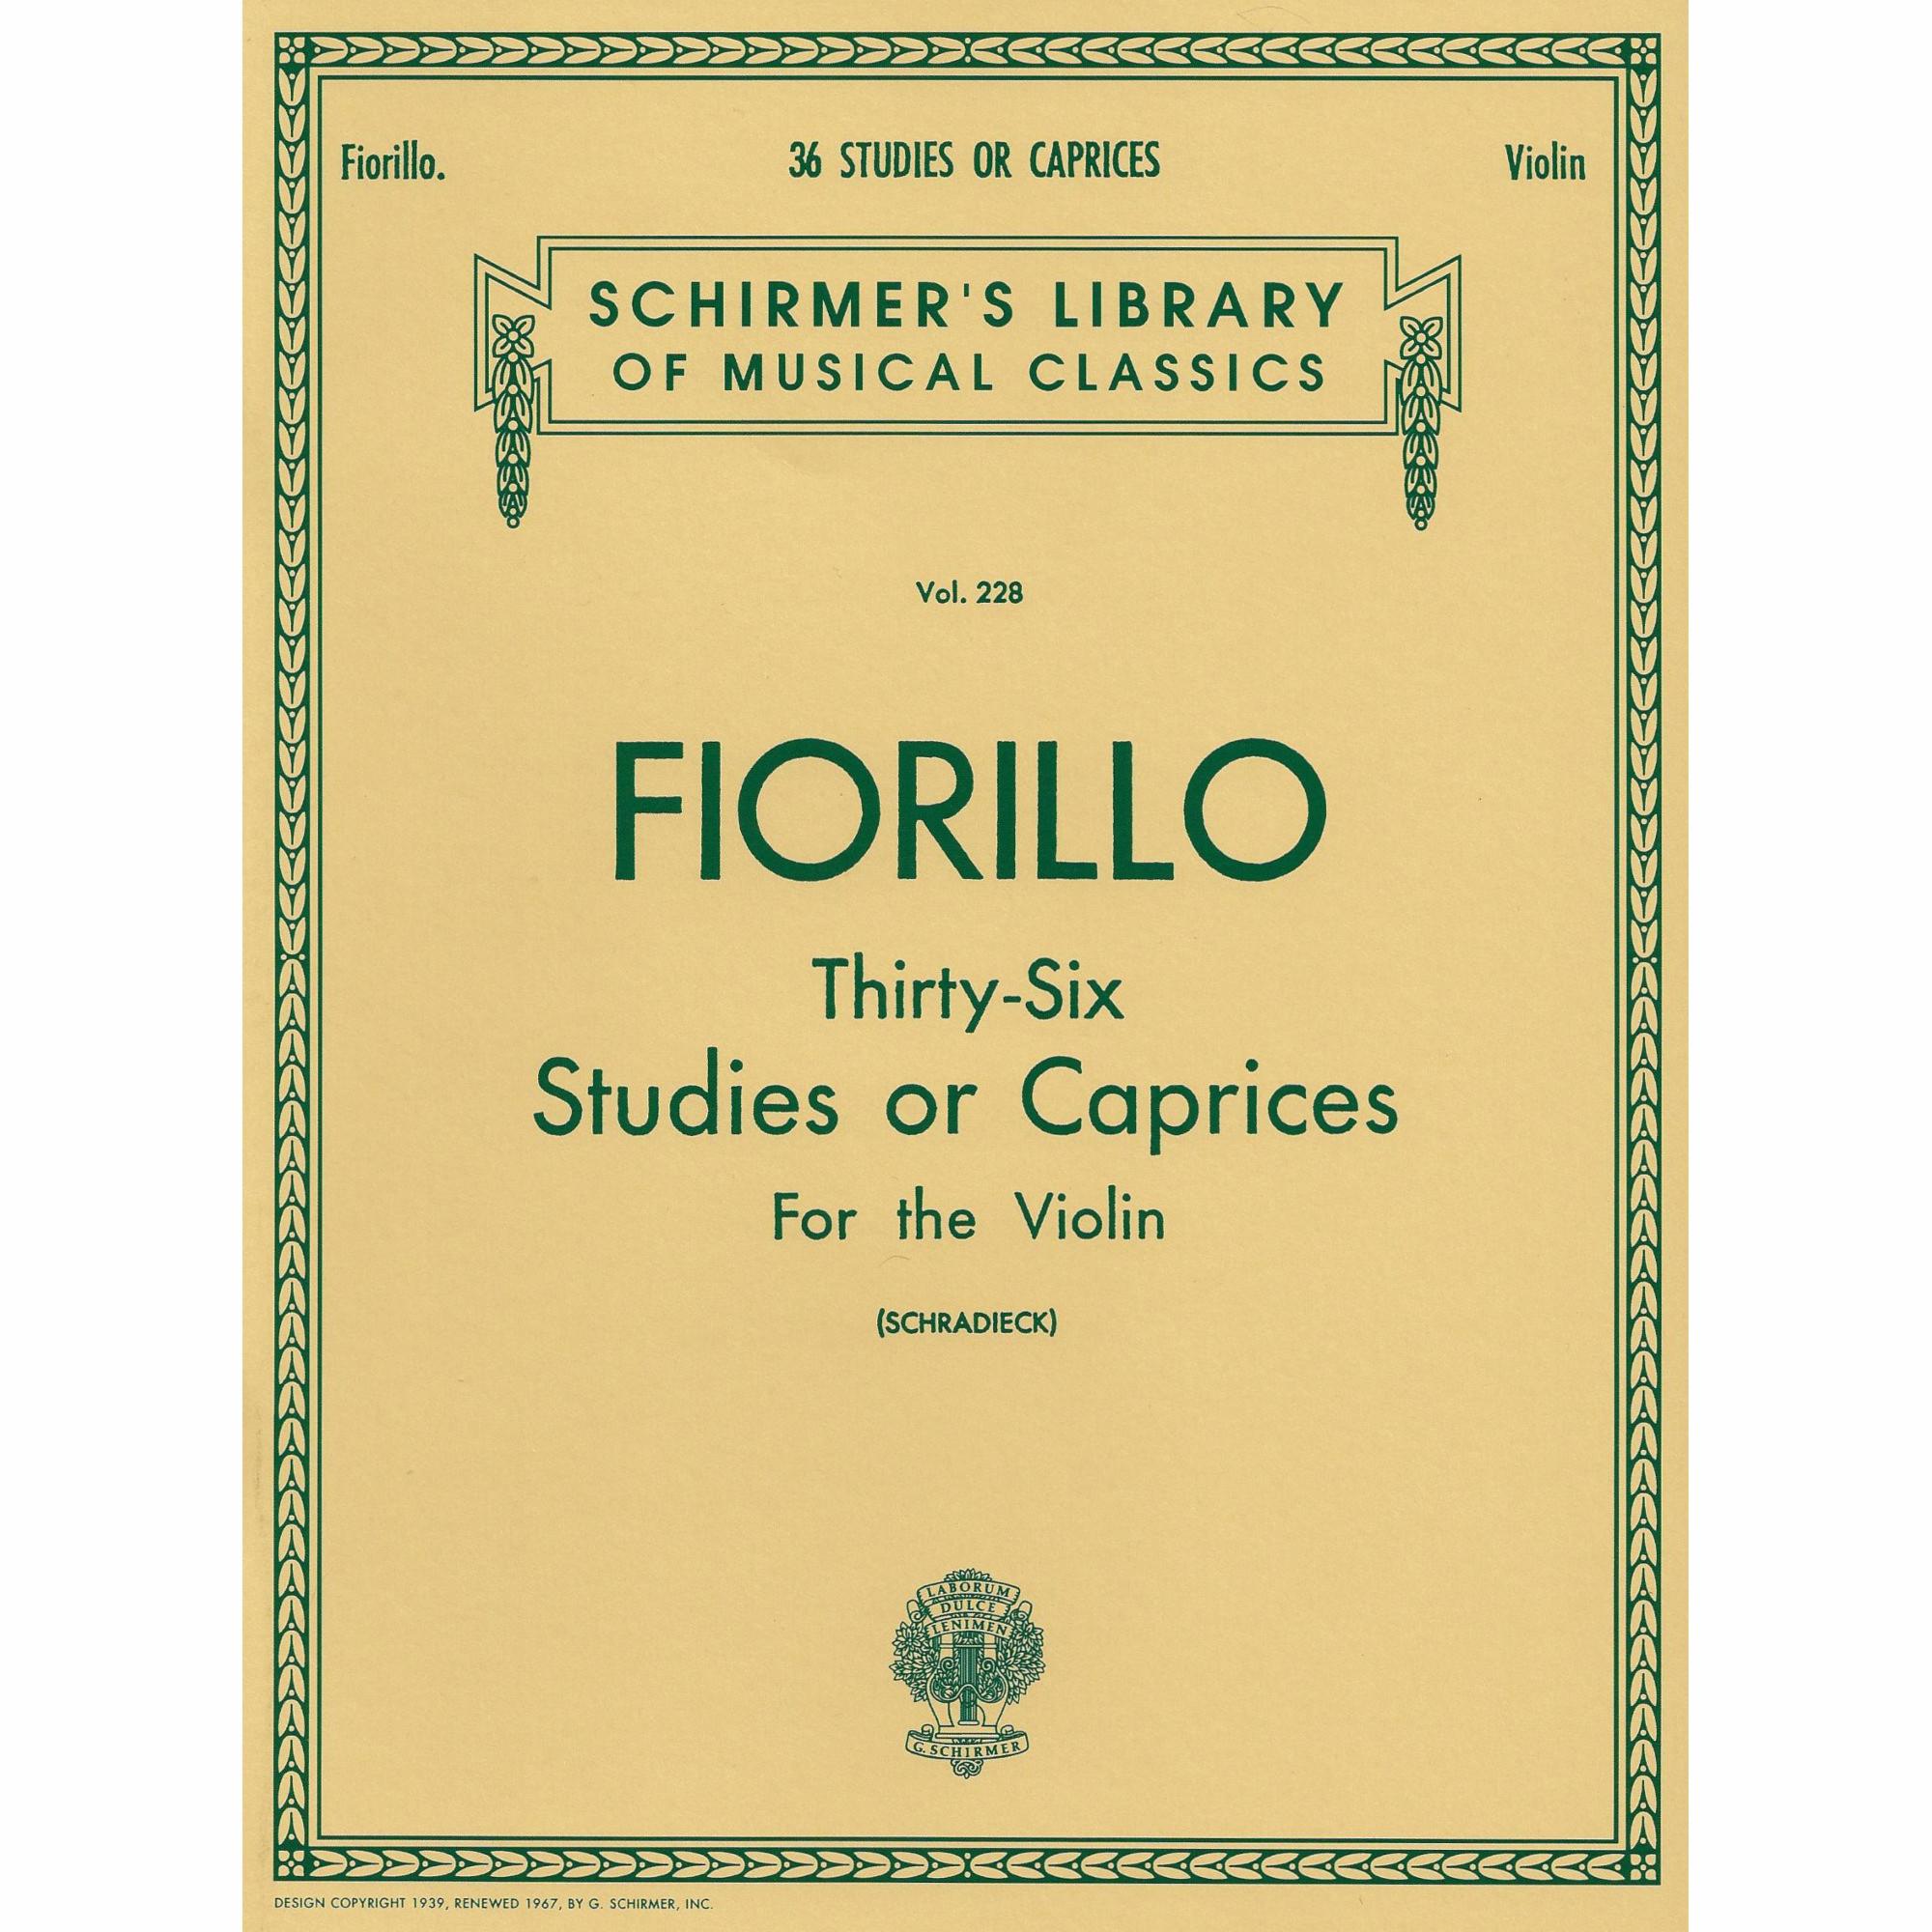 Fiorillo -- Thirty-Six Studies or Caprices for Violin